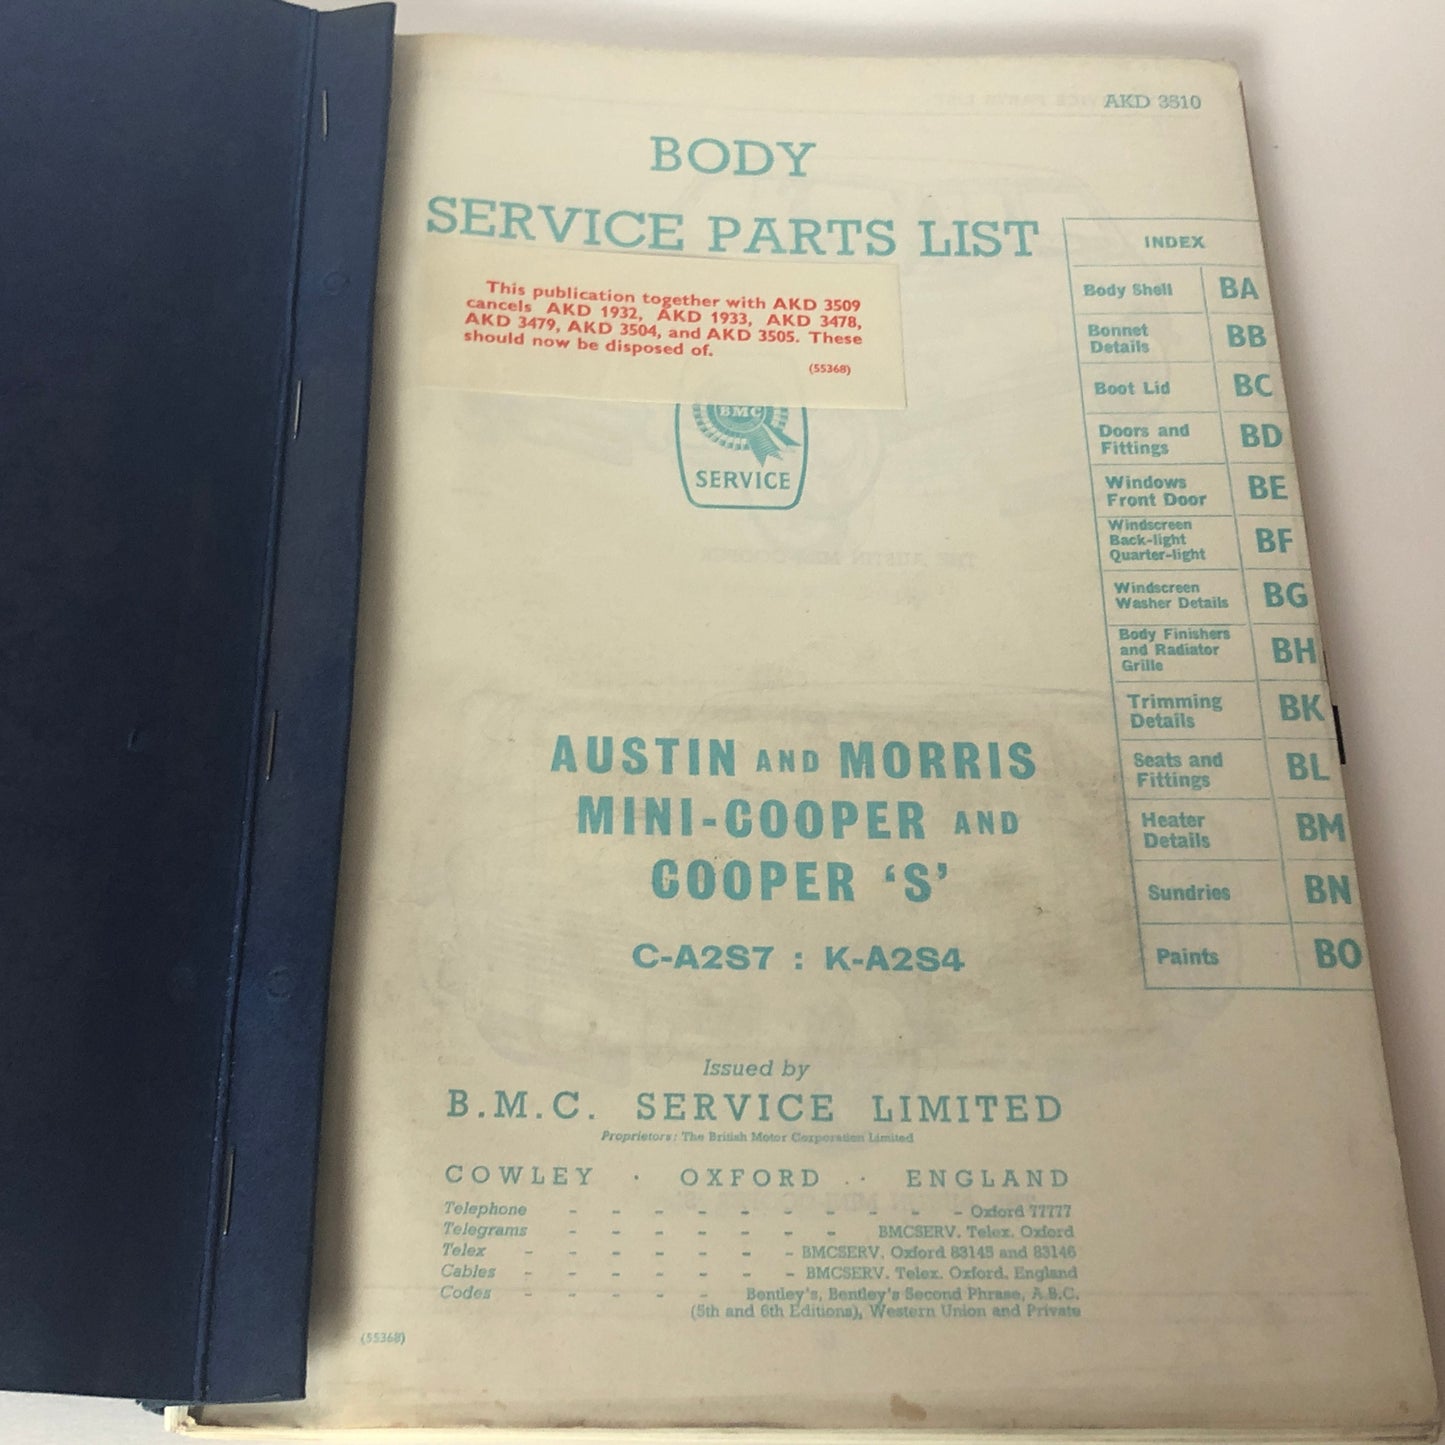 Austin - Morris, Body Service Parts List AKD3510 for Austin and Morris Mini Cooper and Cooper "S"